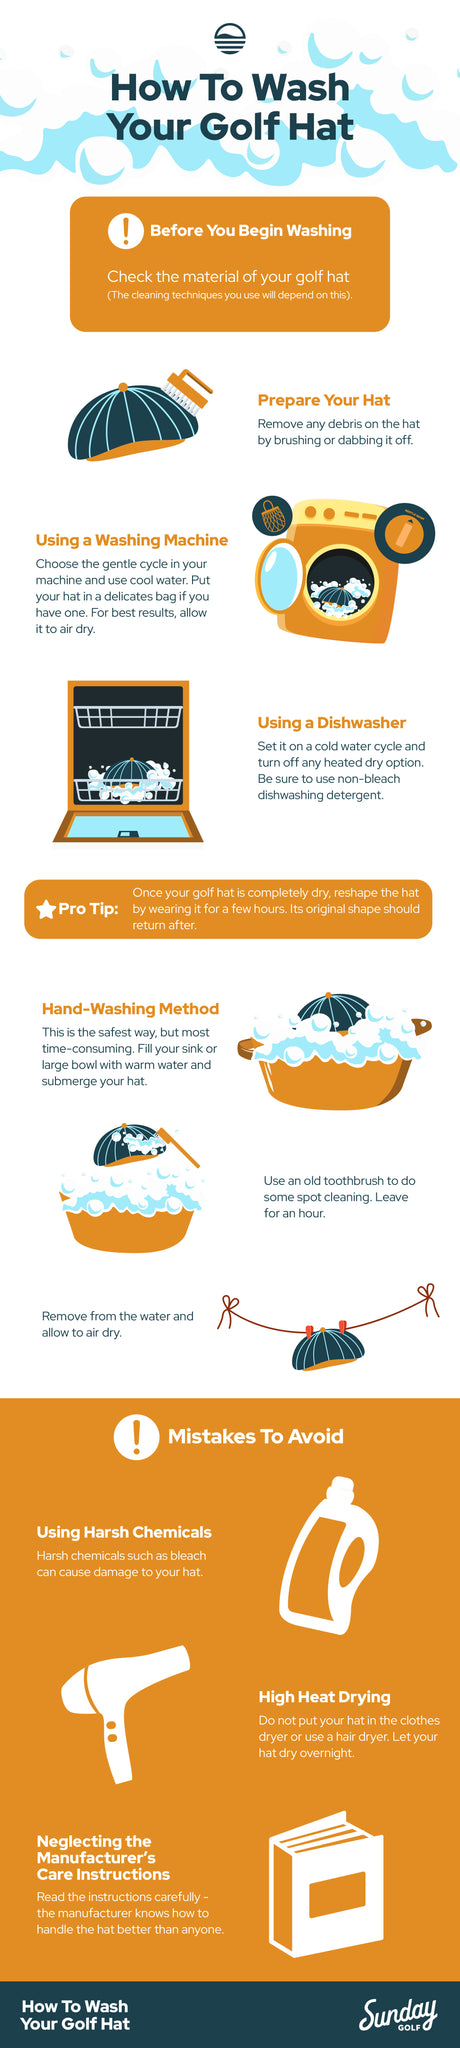 how to wash your golf hat infographic